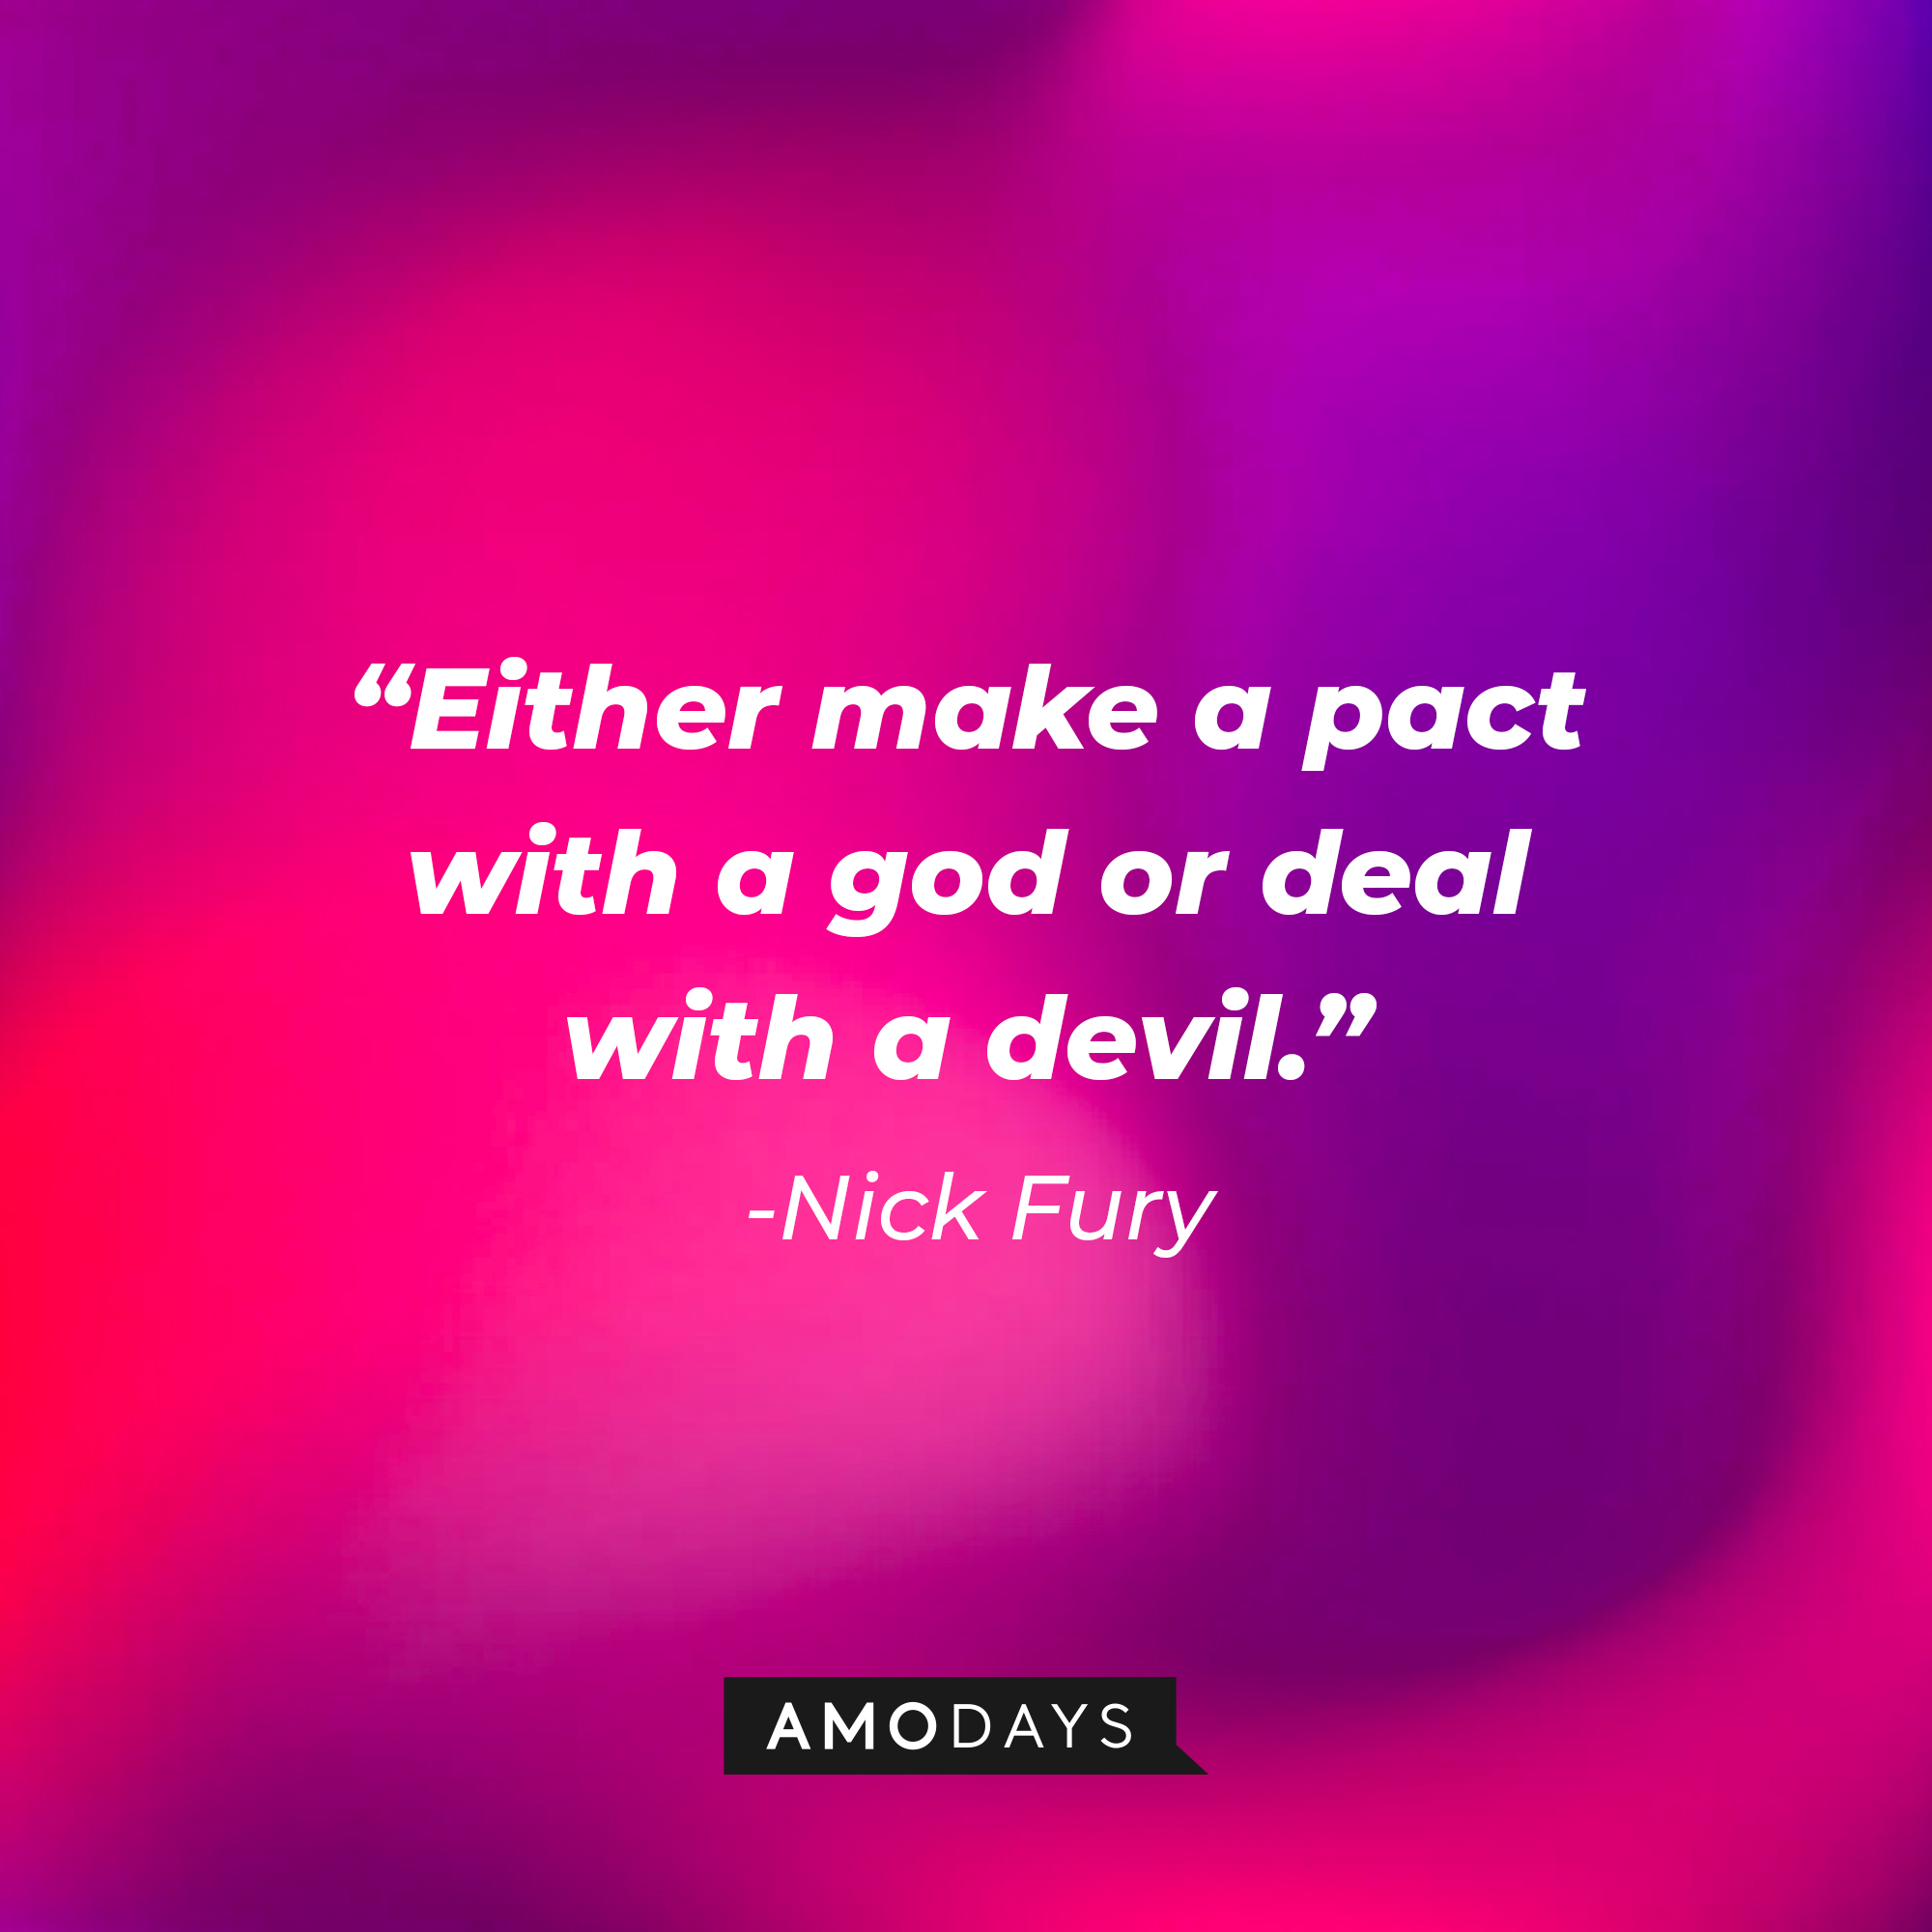 Nick Fury's quote: "Either make a pact with a god or deal with a devil." | Source: AmoDays